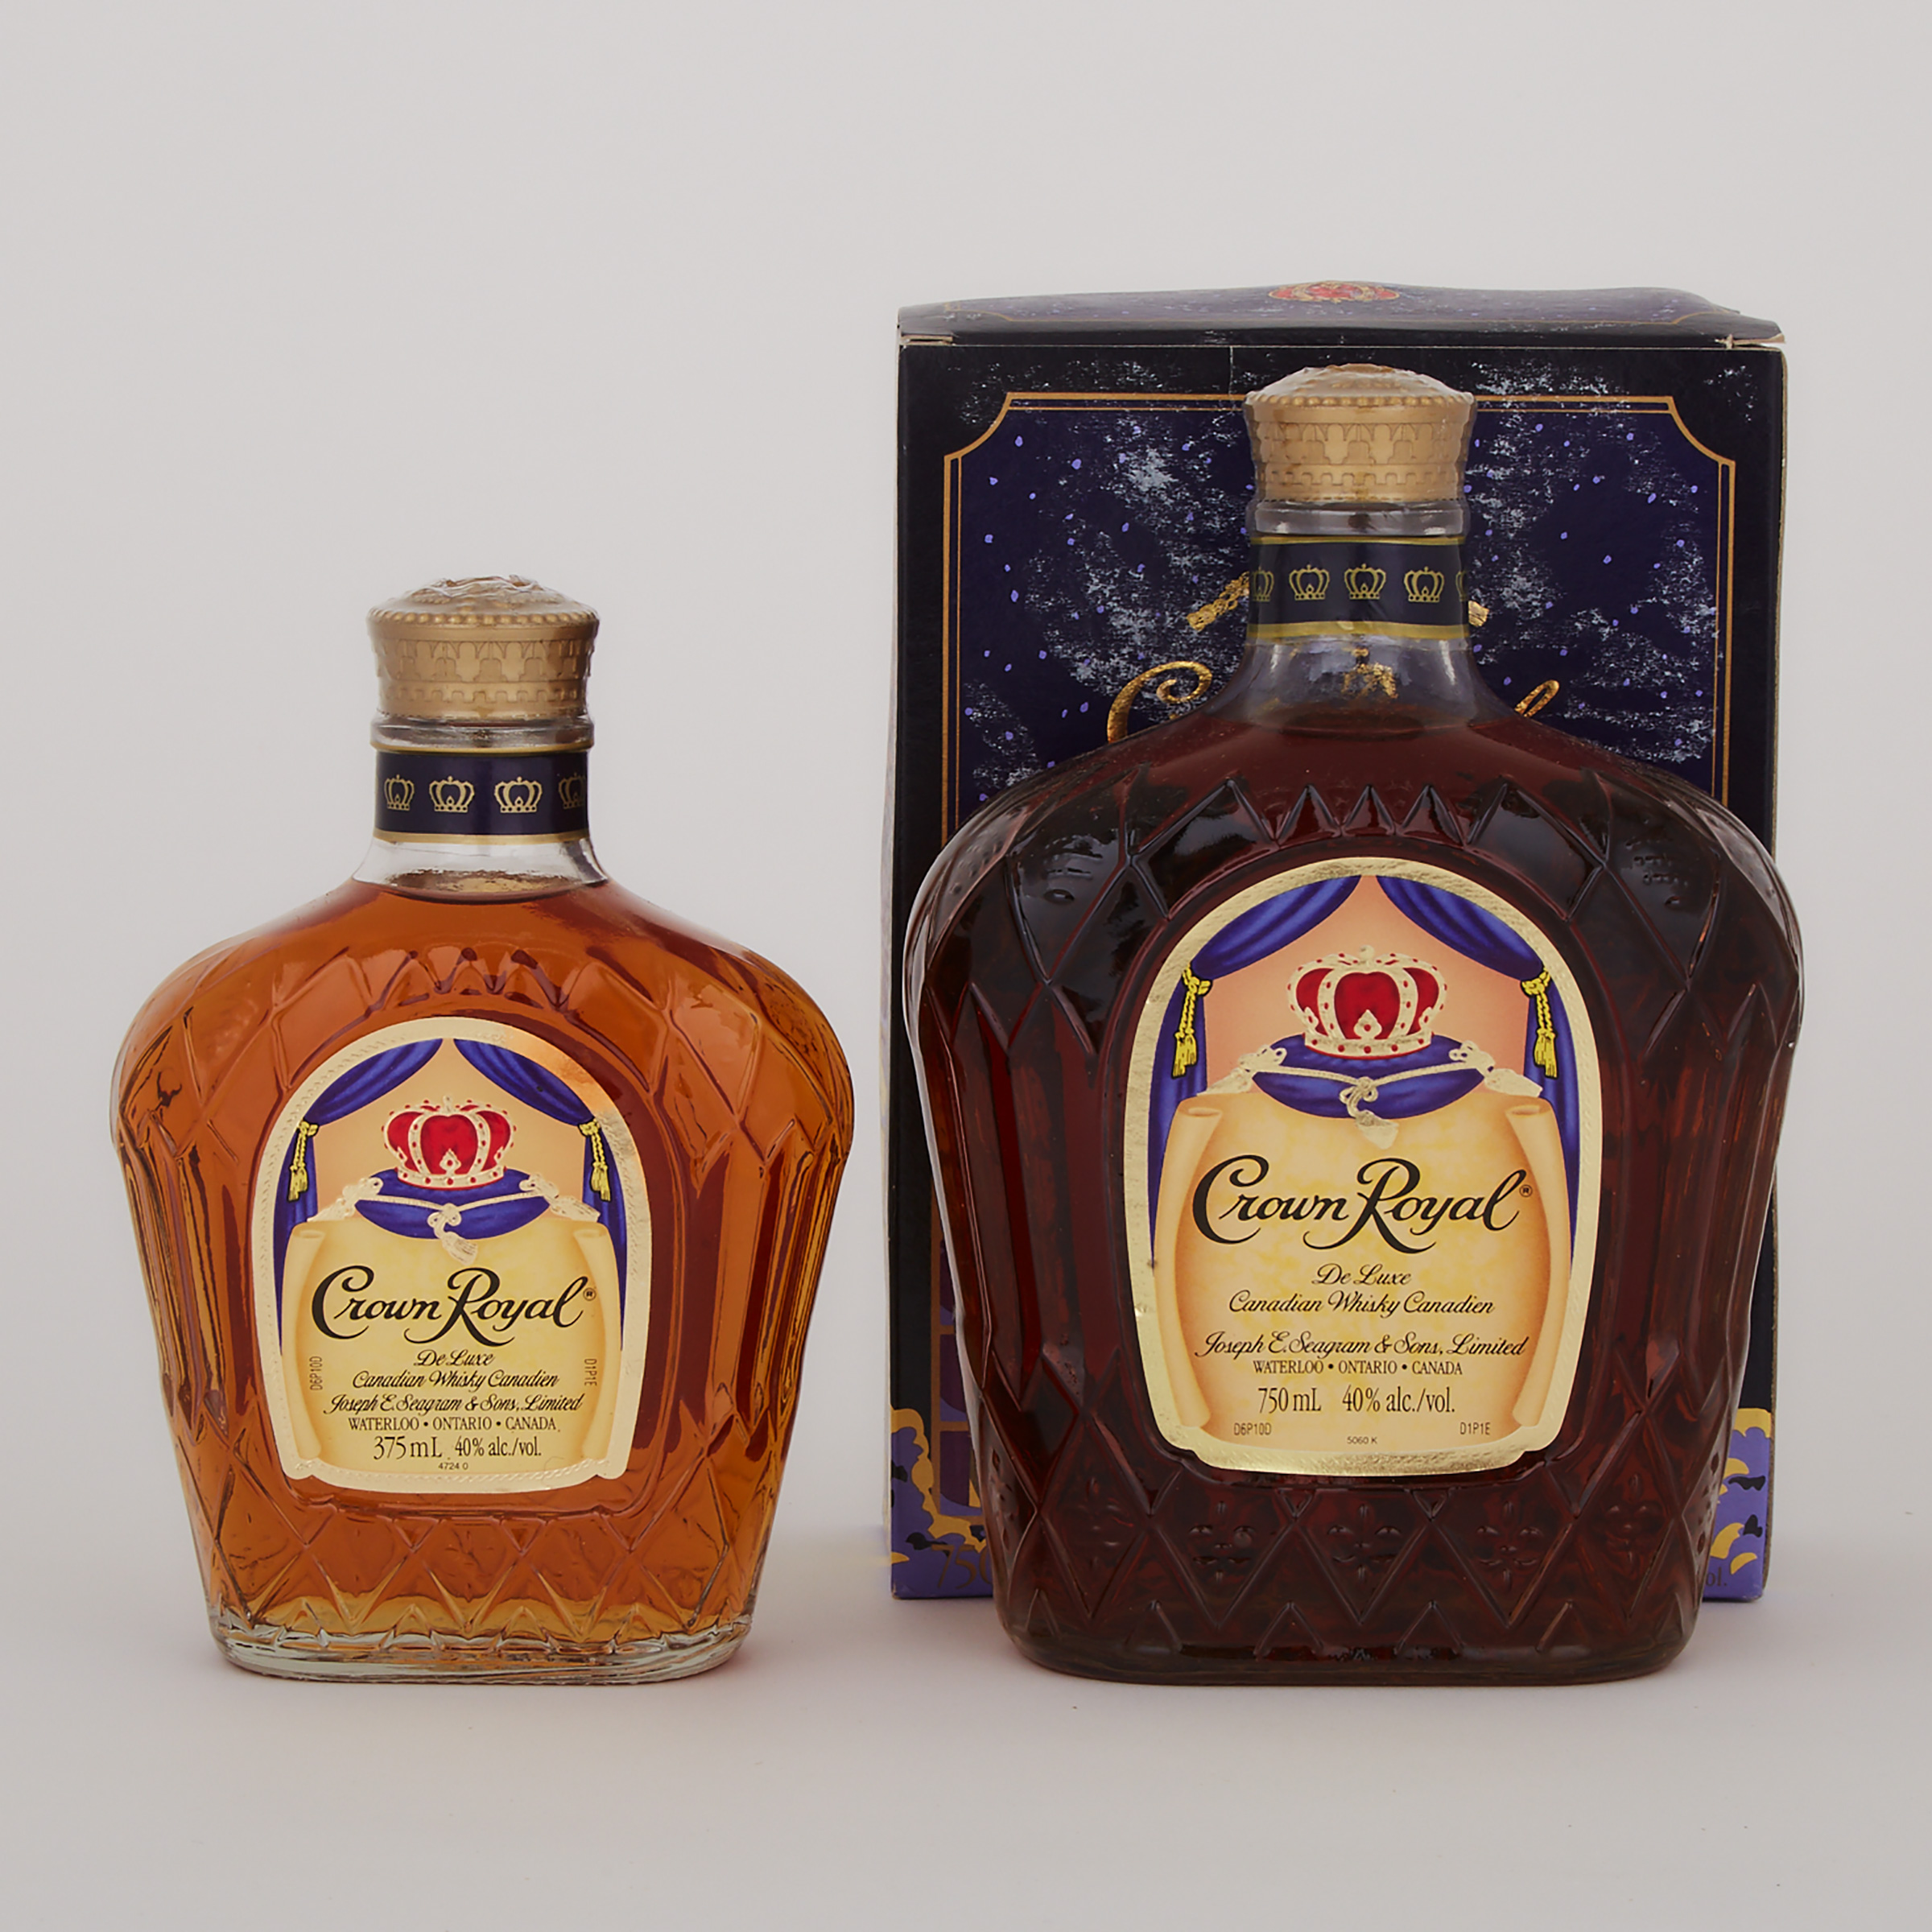 CROWN ROYAL DELUXE CANADIAN WHISKY (ONE 750 ML)
CROWN ROYAL DELUXE CANADIAN WHISKY (ONE 375 ML)